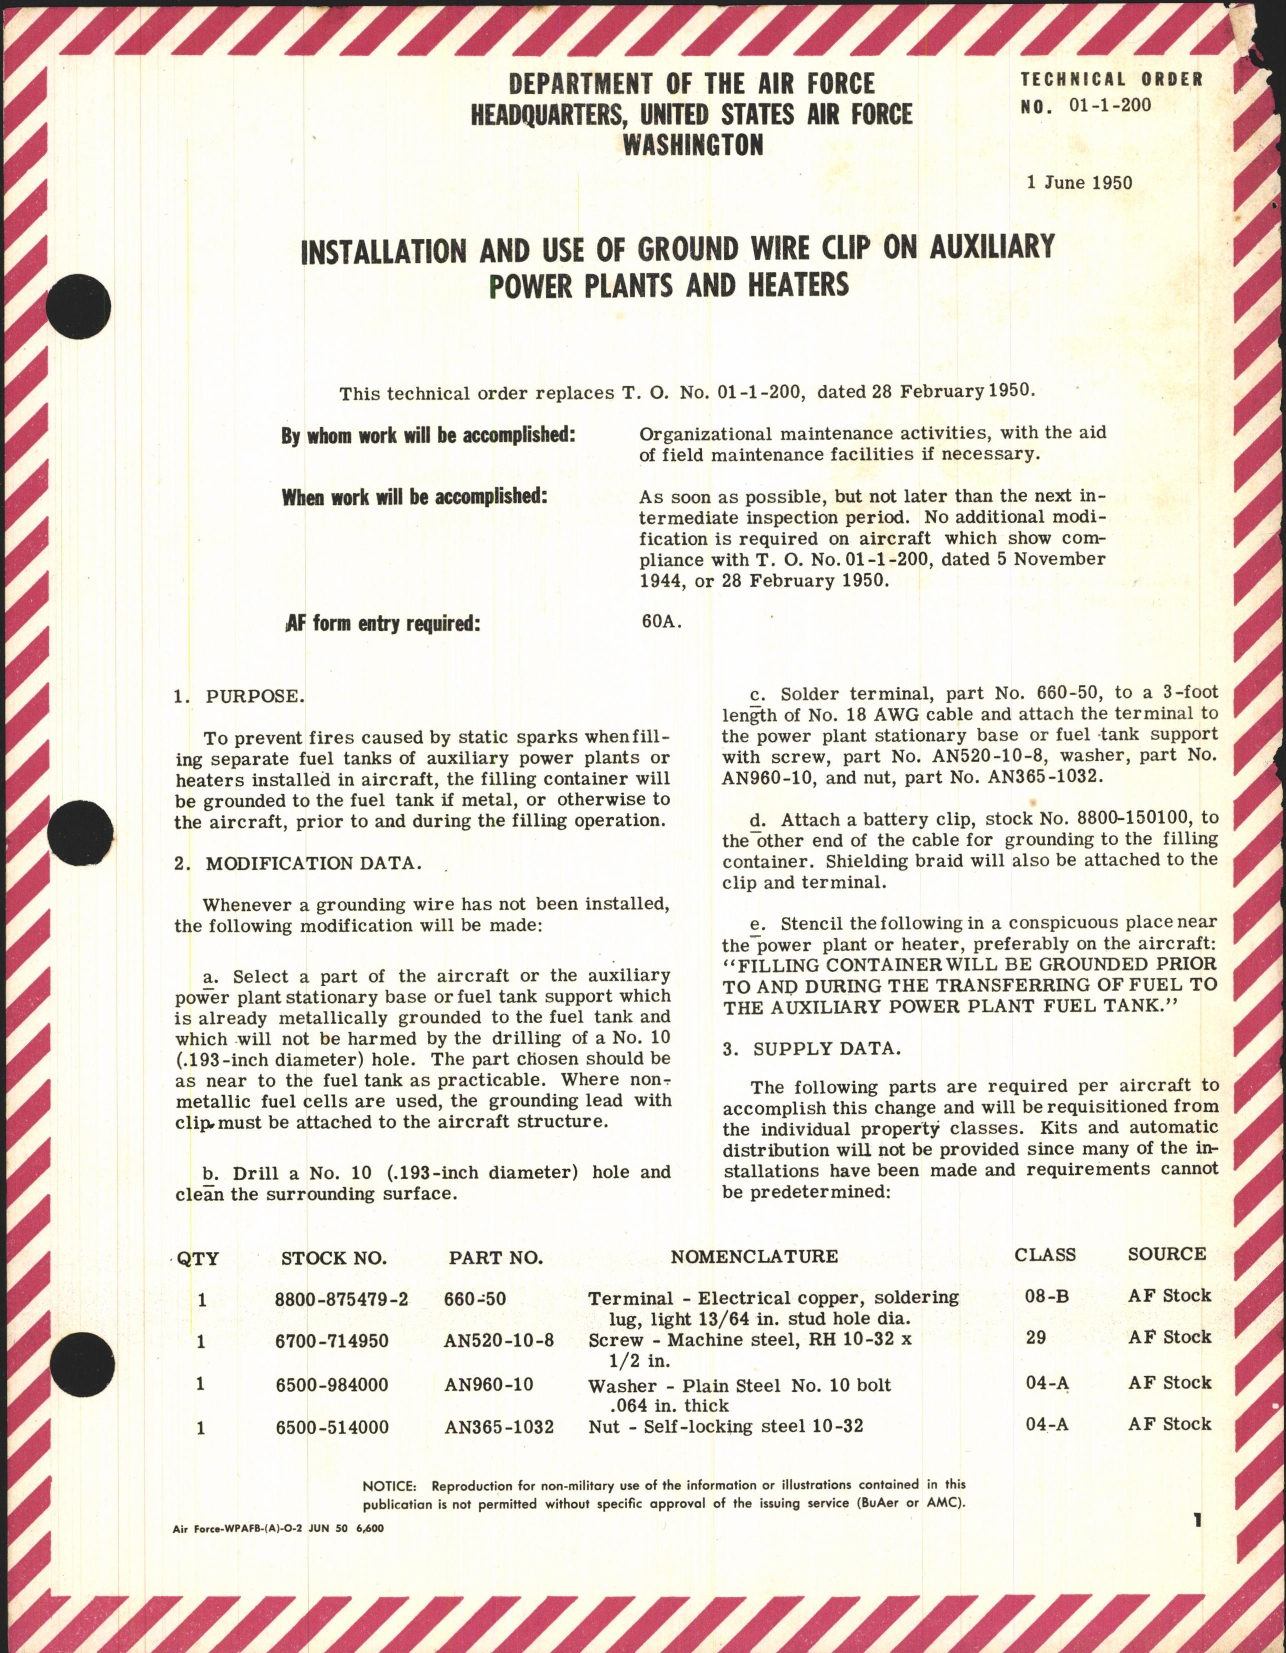 Sample page 1 from AirCorps Library document: Installation and Use of Ground Wire Clip on Auxiliary Power Plants and Heaters